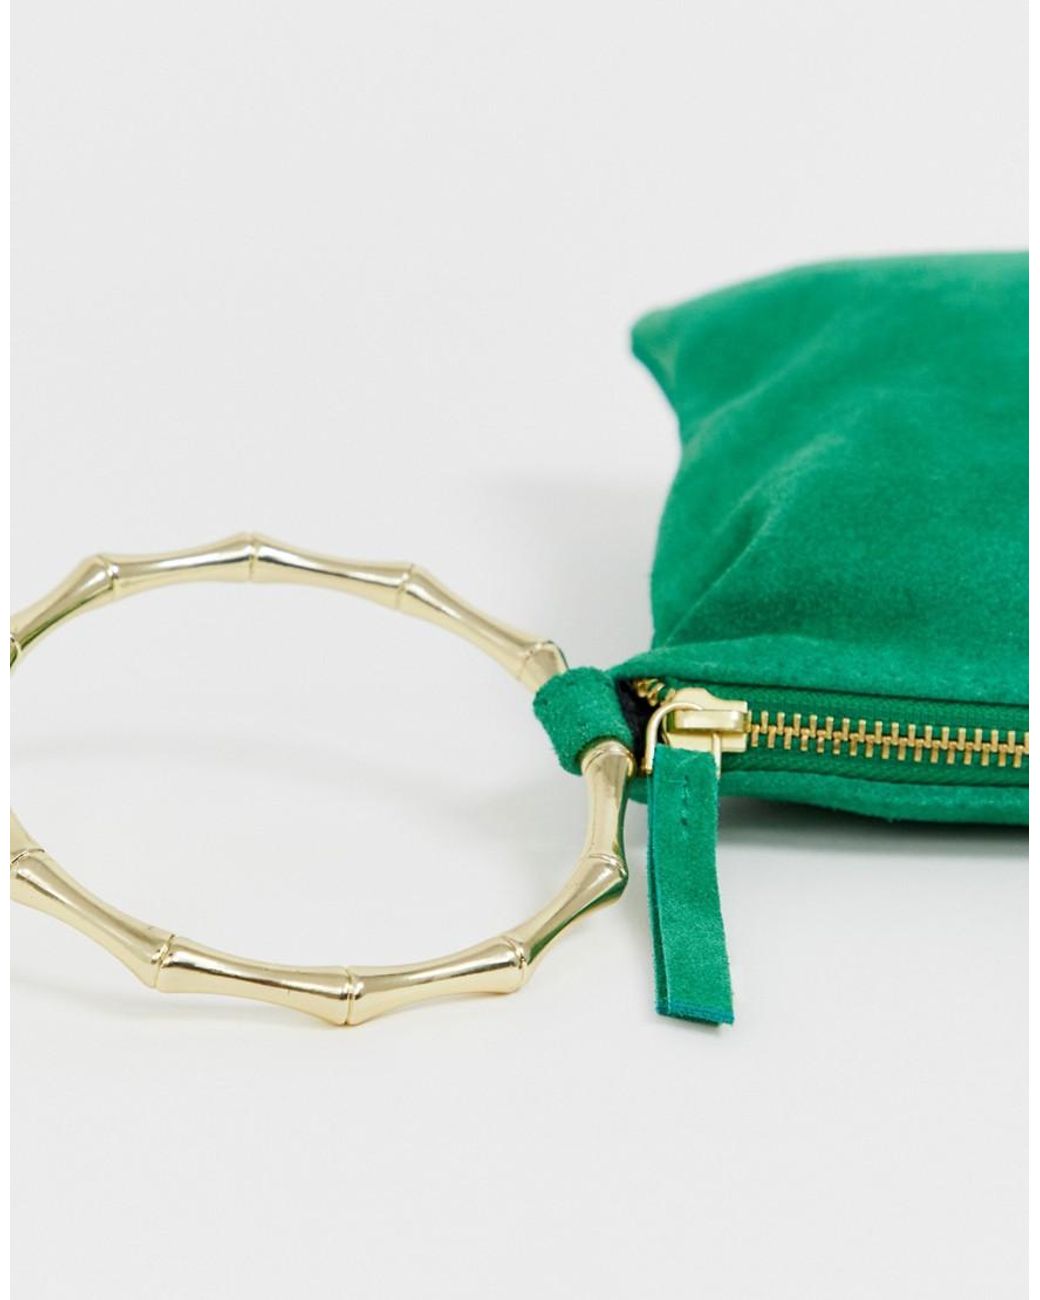 ASOS Suede Clutch Bag With Bamboo Ring in Green | Lyst